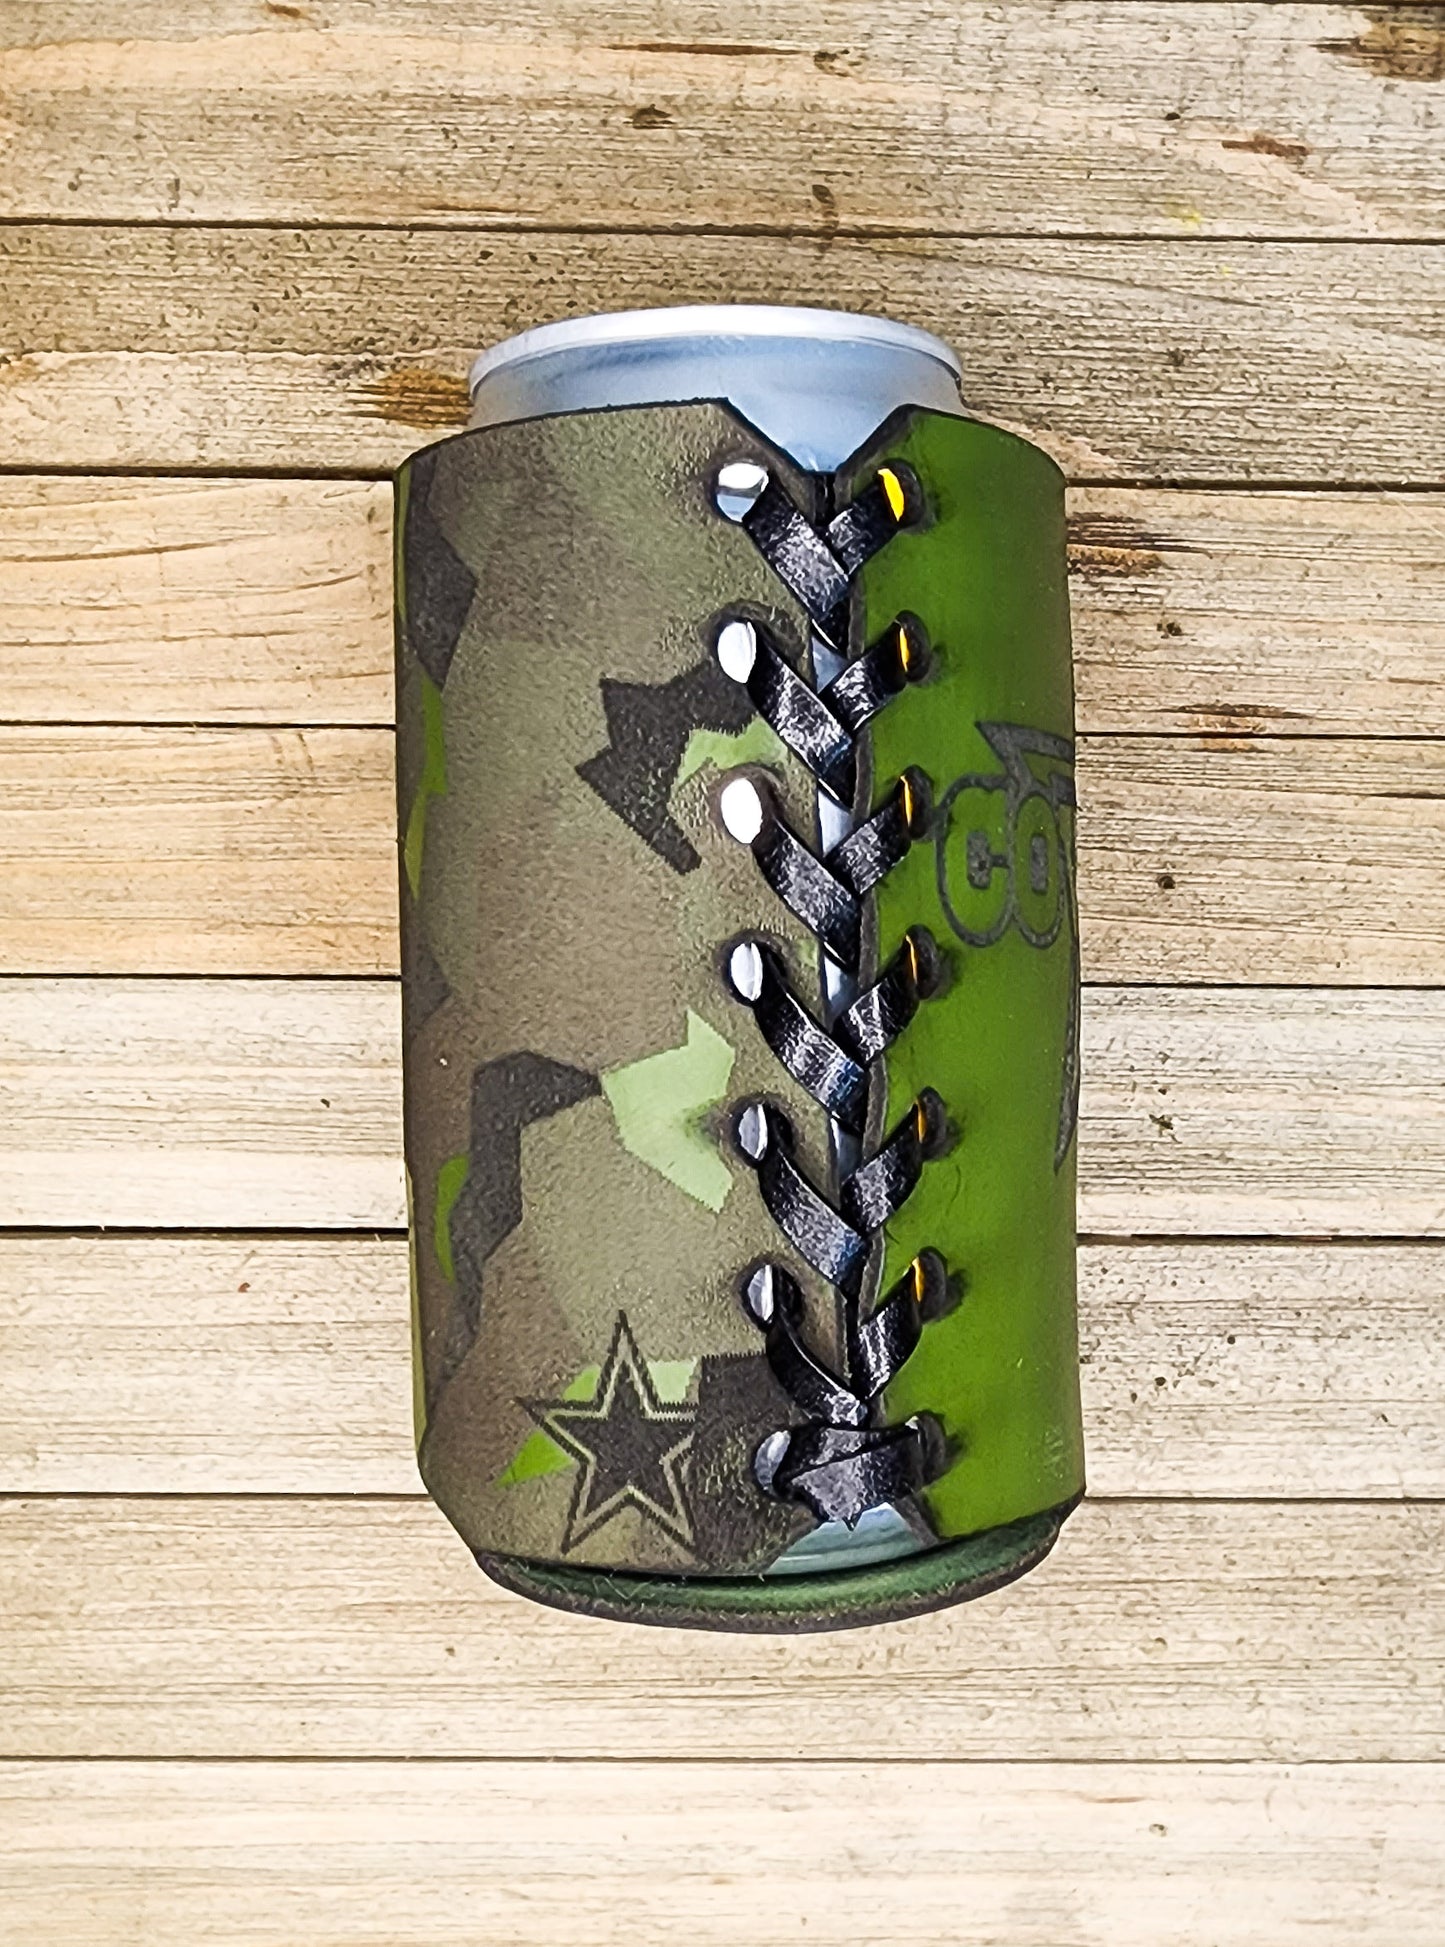 Side view of green leather personalized koozie with black lacing in a baseball pattern stitch personalized gift for cowboy fans